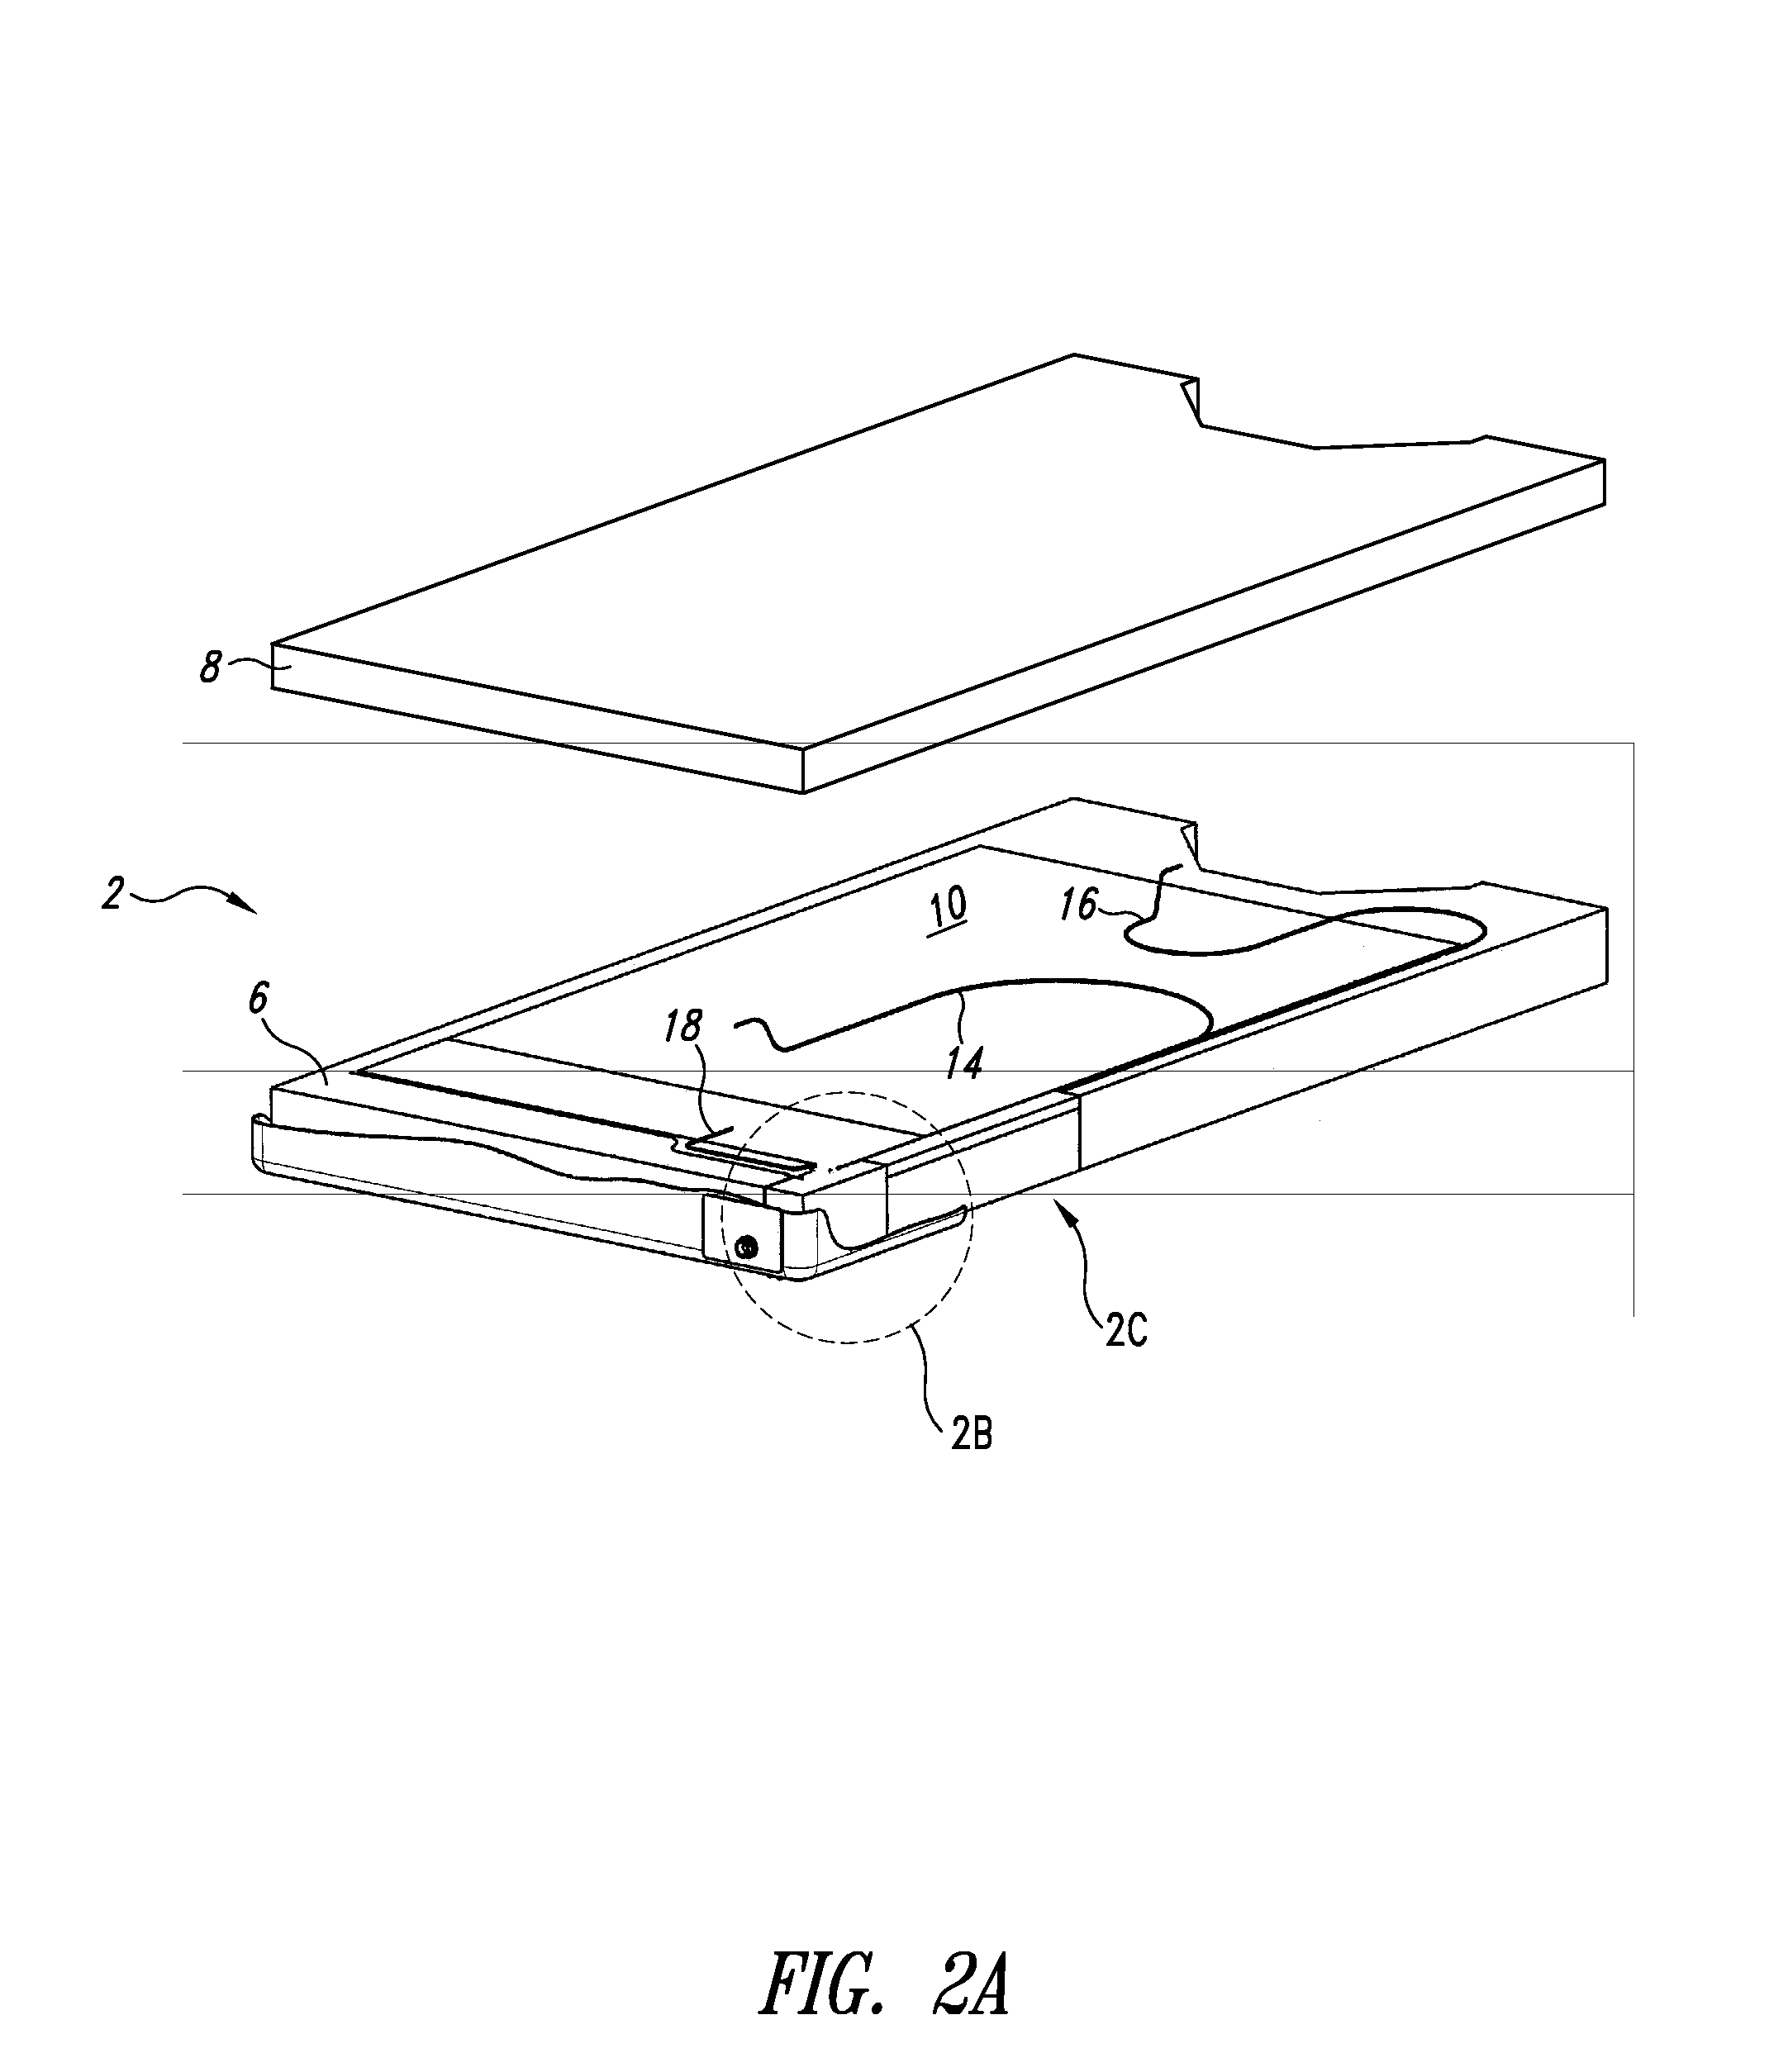 Device and method for temperature management of heating pad systems